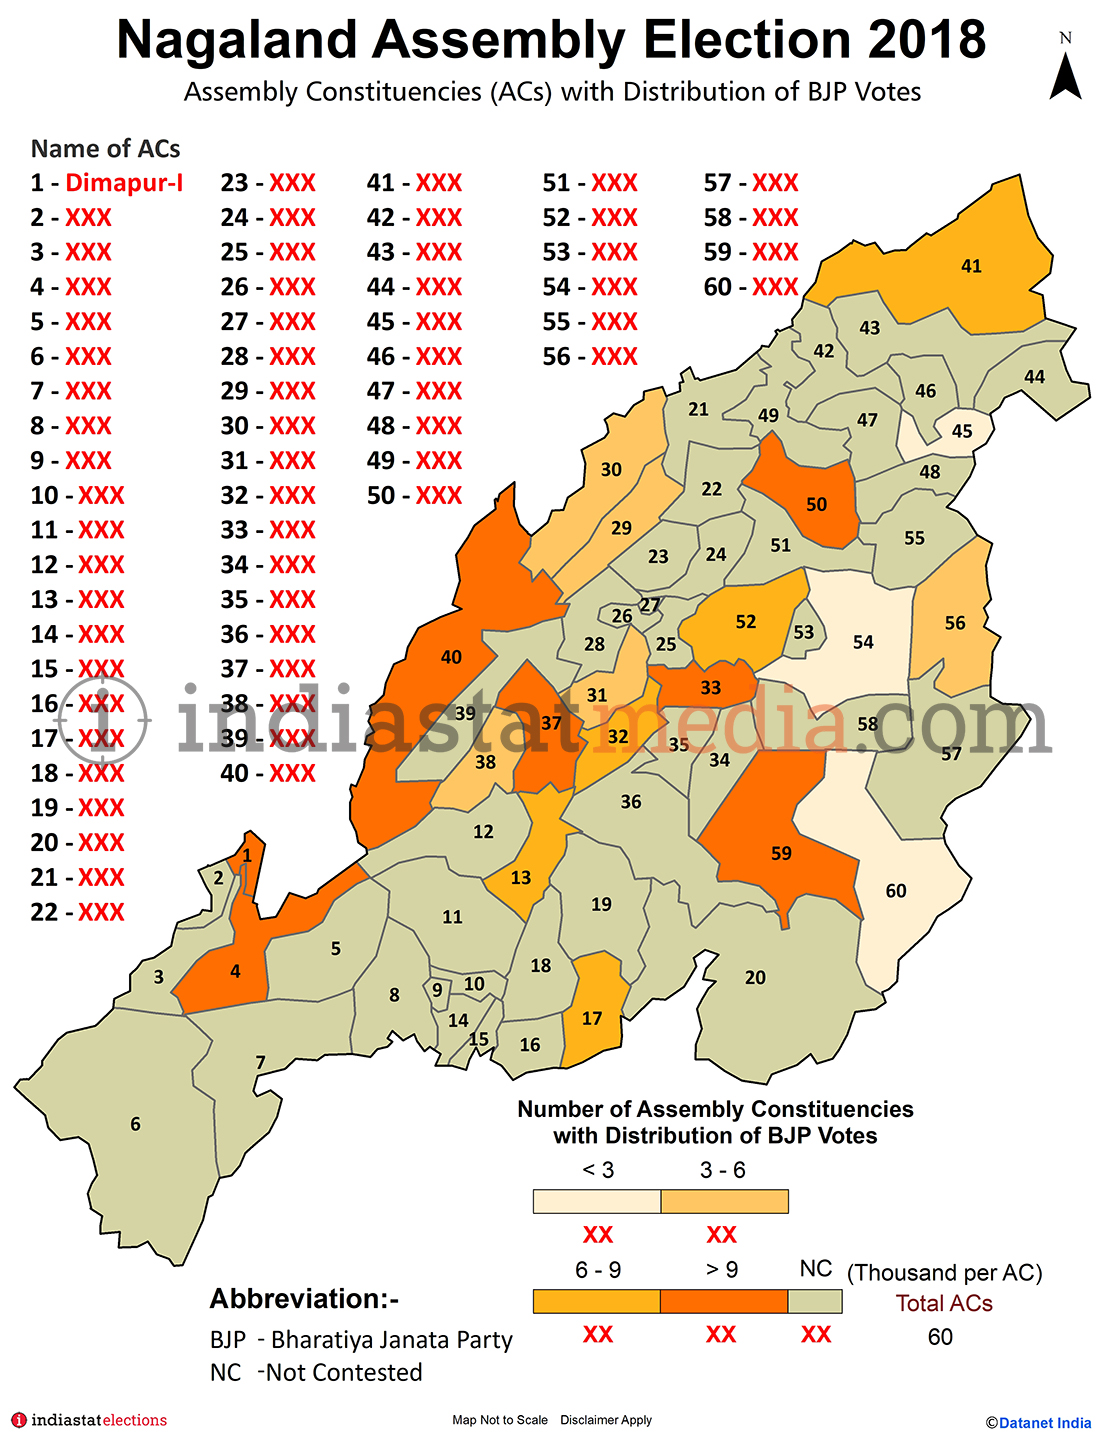 Distribution of BJP Votes by Constituencies in Nagaland (Assembly Election - 2018)